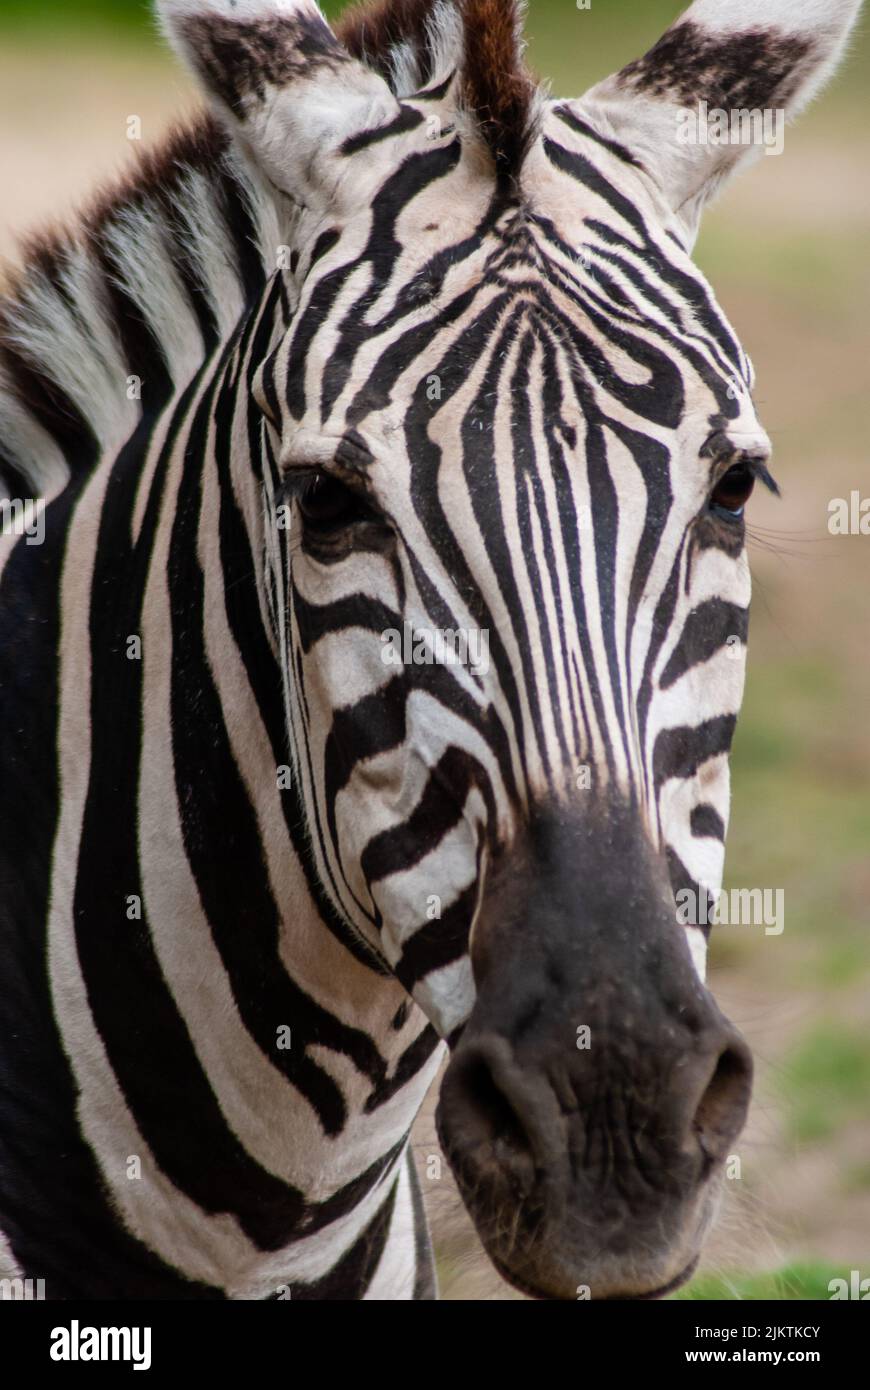 A vertical closeup of a zebra's face looking at the camera Stock Photo